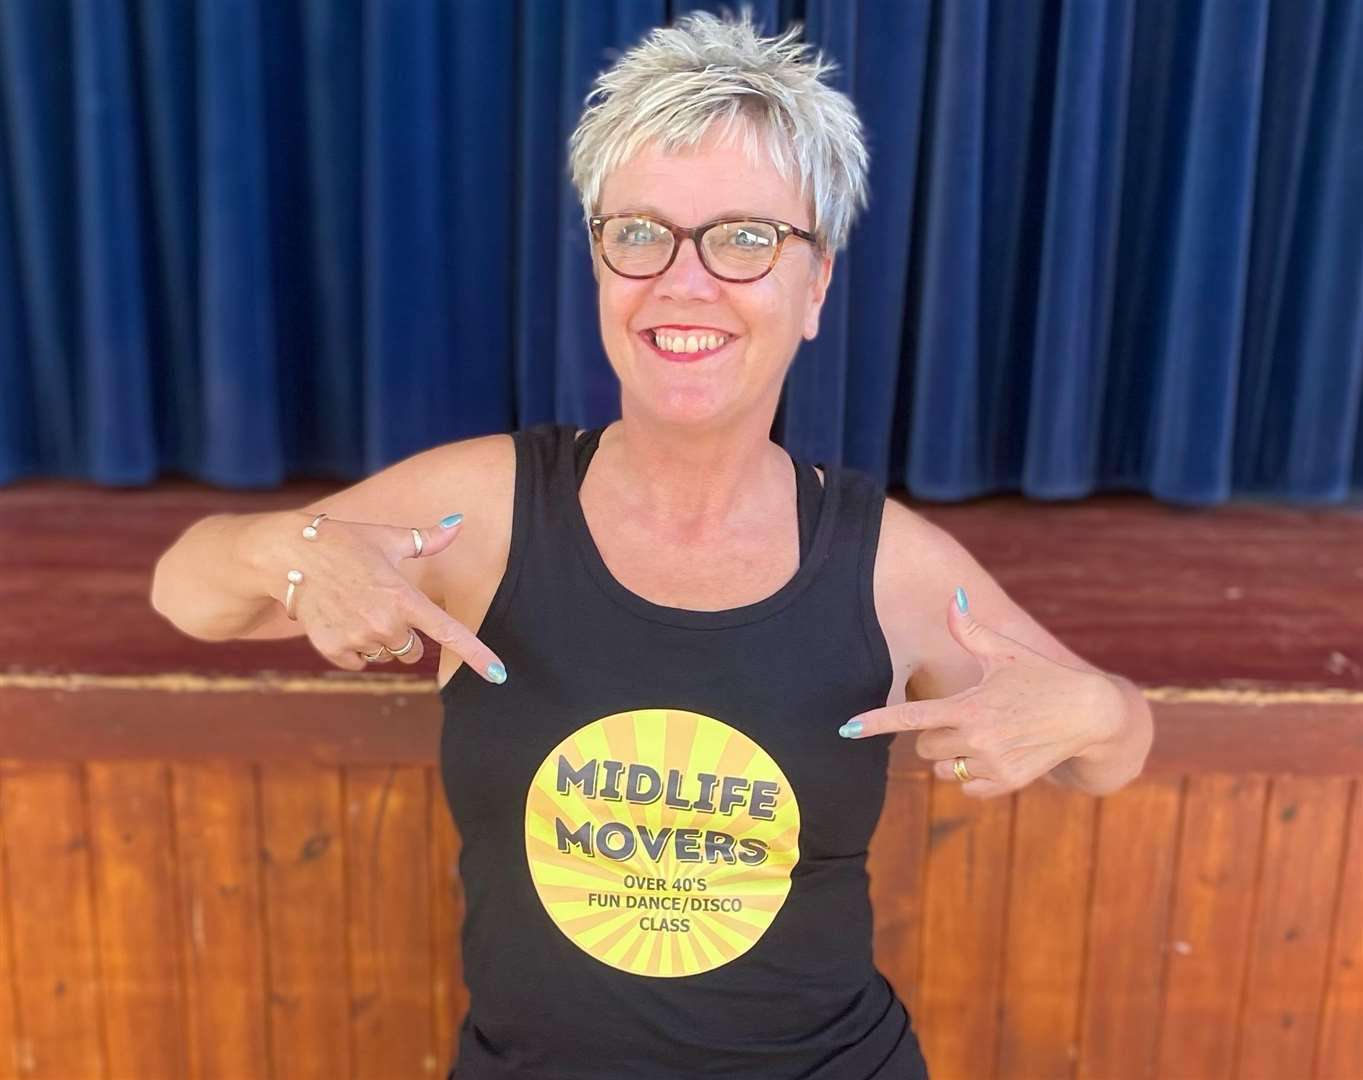 Debs Forsyth started Midlife Movers six weeks ago as she wanted to find a fun way to stay active